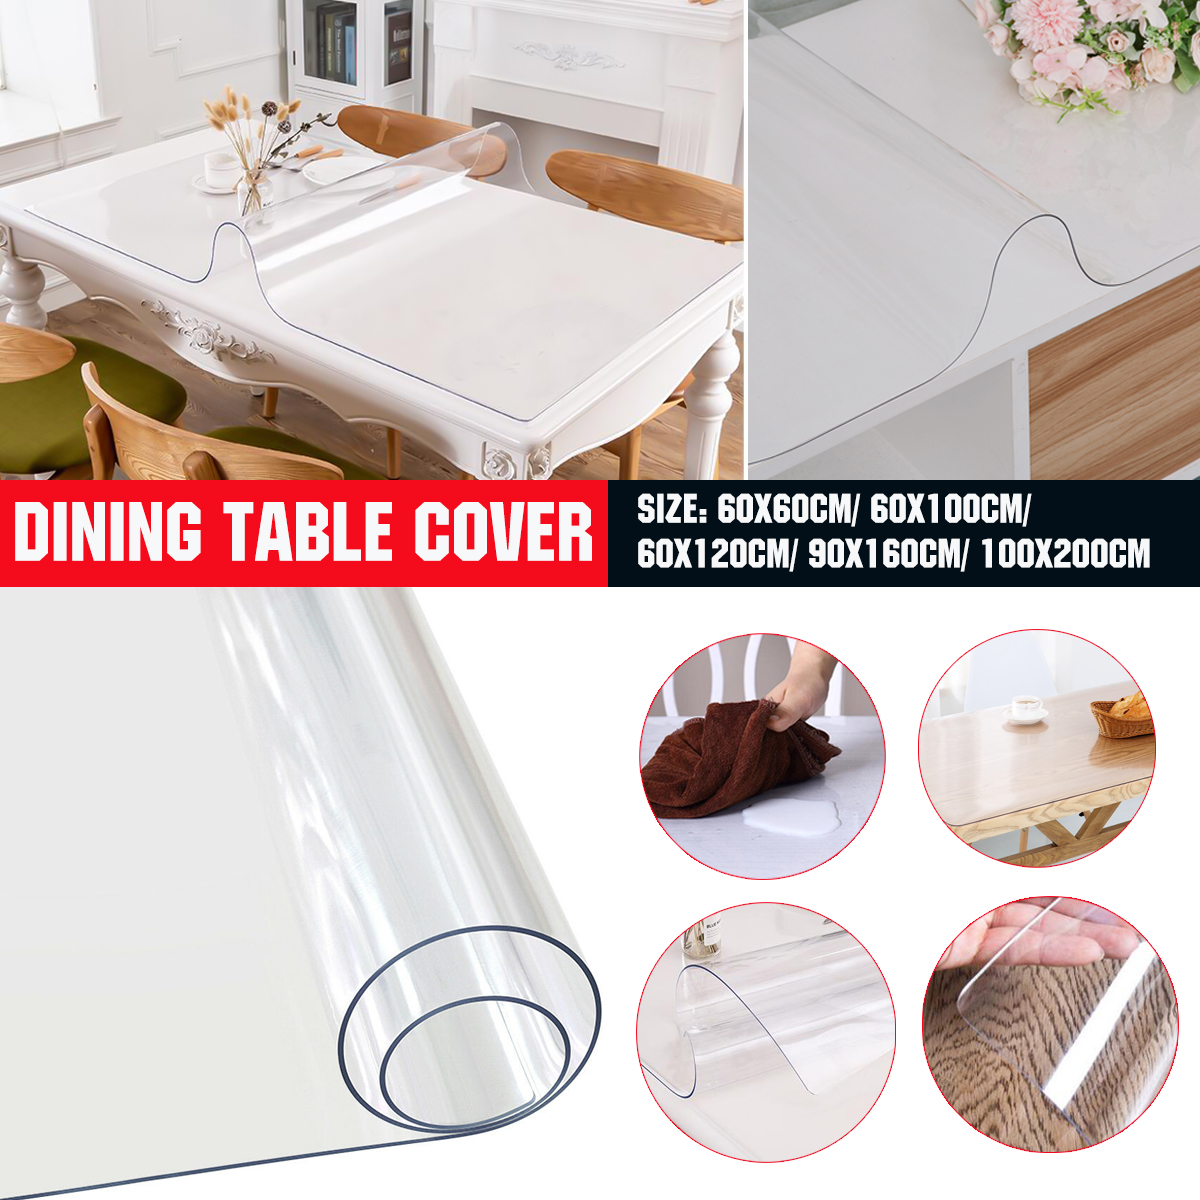 15mm-Thickness-Clear-Plastic-PVC-Tablecloth-Transparent-Non-Stick-Waterproof-Protector-Dining-Table--1882391-1